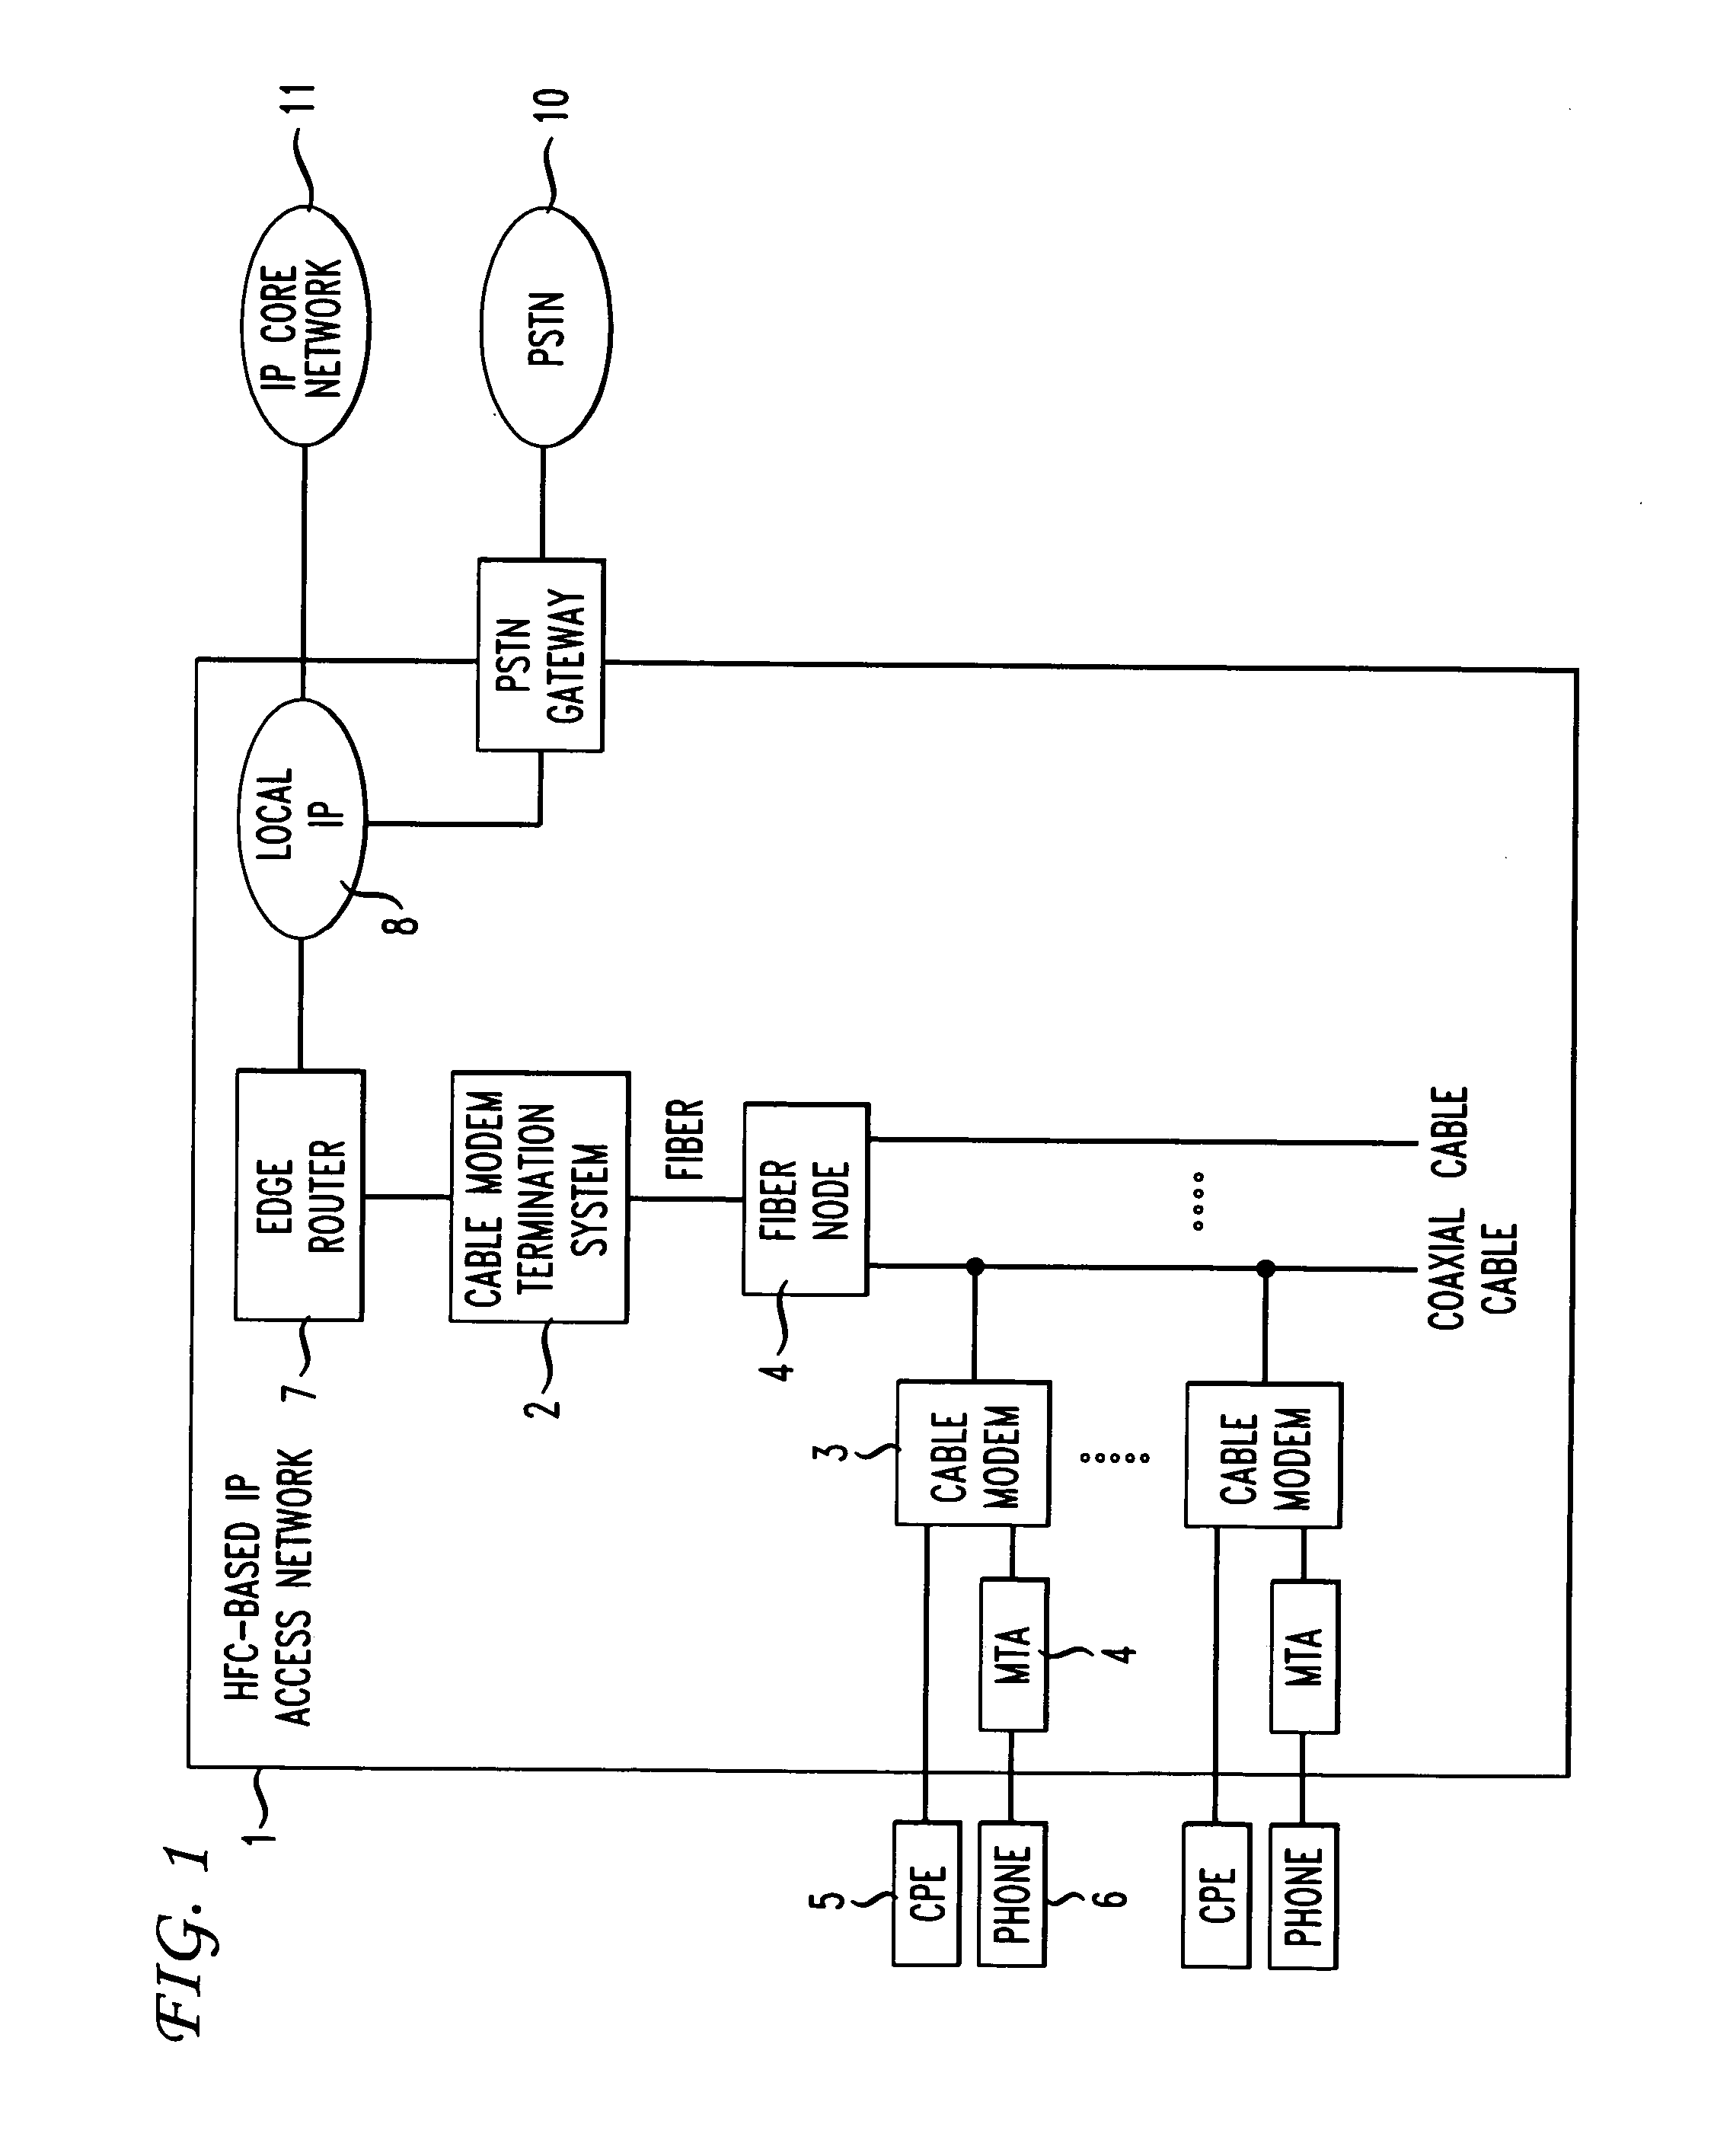 Upstream bandwidth allocation for packet telephony in a shared-media packet-switched access network